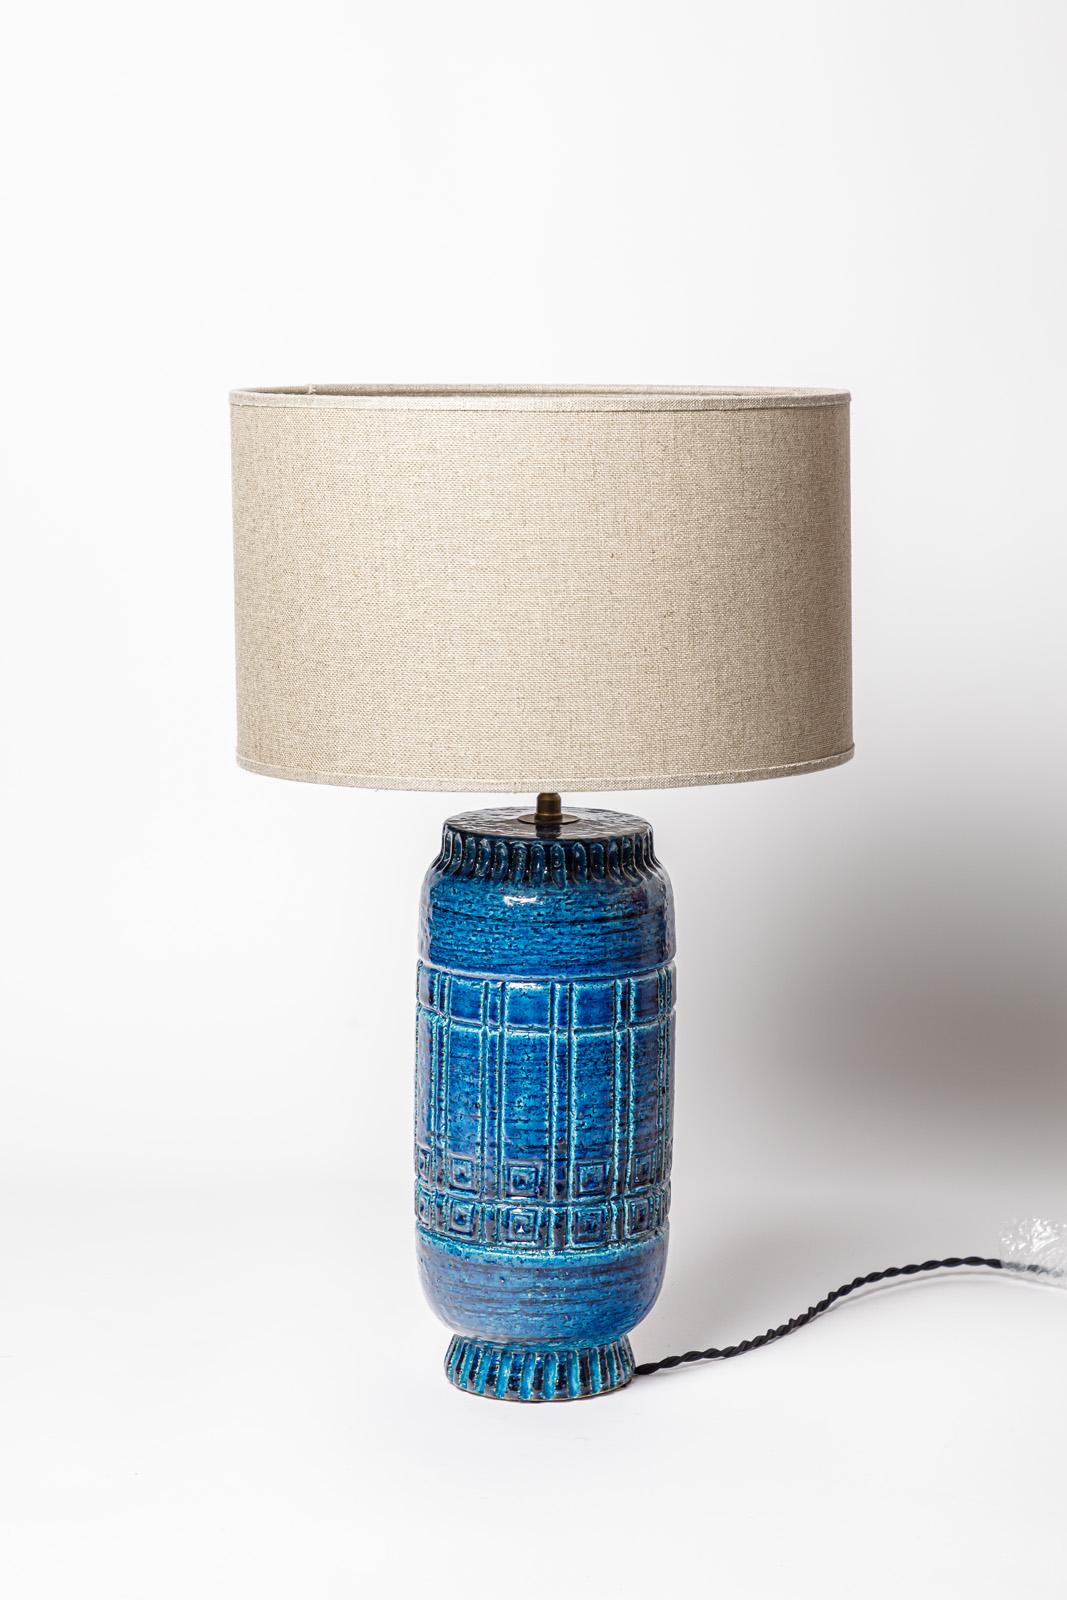 Pol Chambost Blue XXth Century Ceramic Table Lamp Lighting Design Model 1307 In Excellent Condition For Sale In Neuilly-en- sancerre, FR